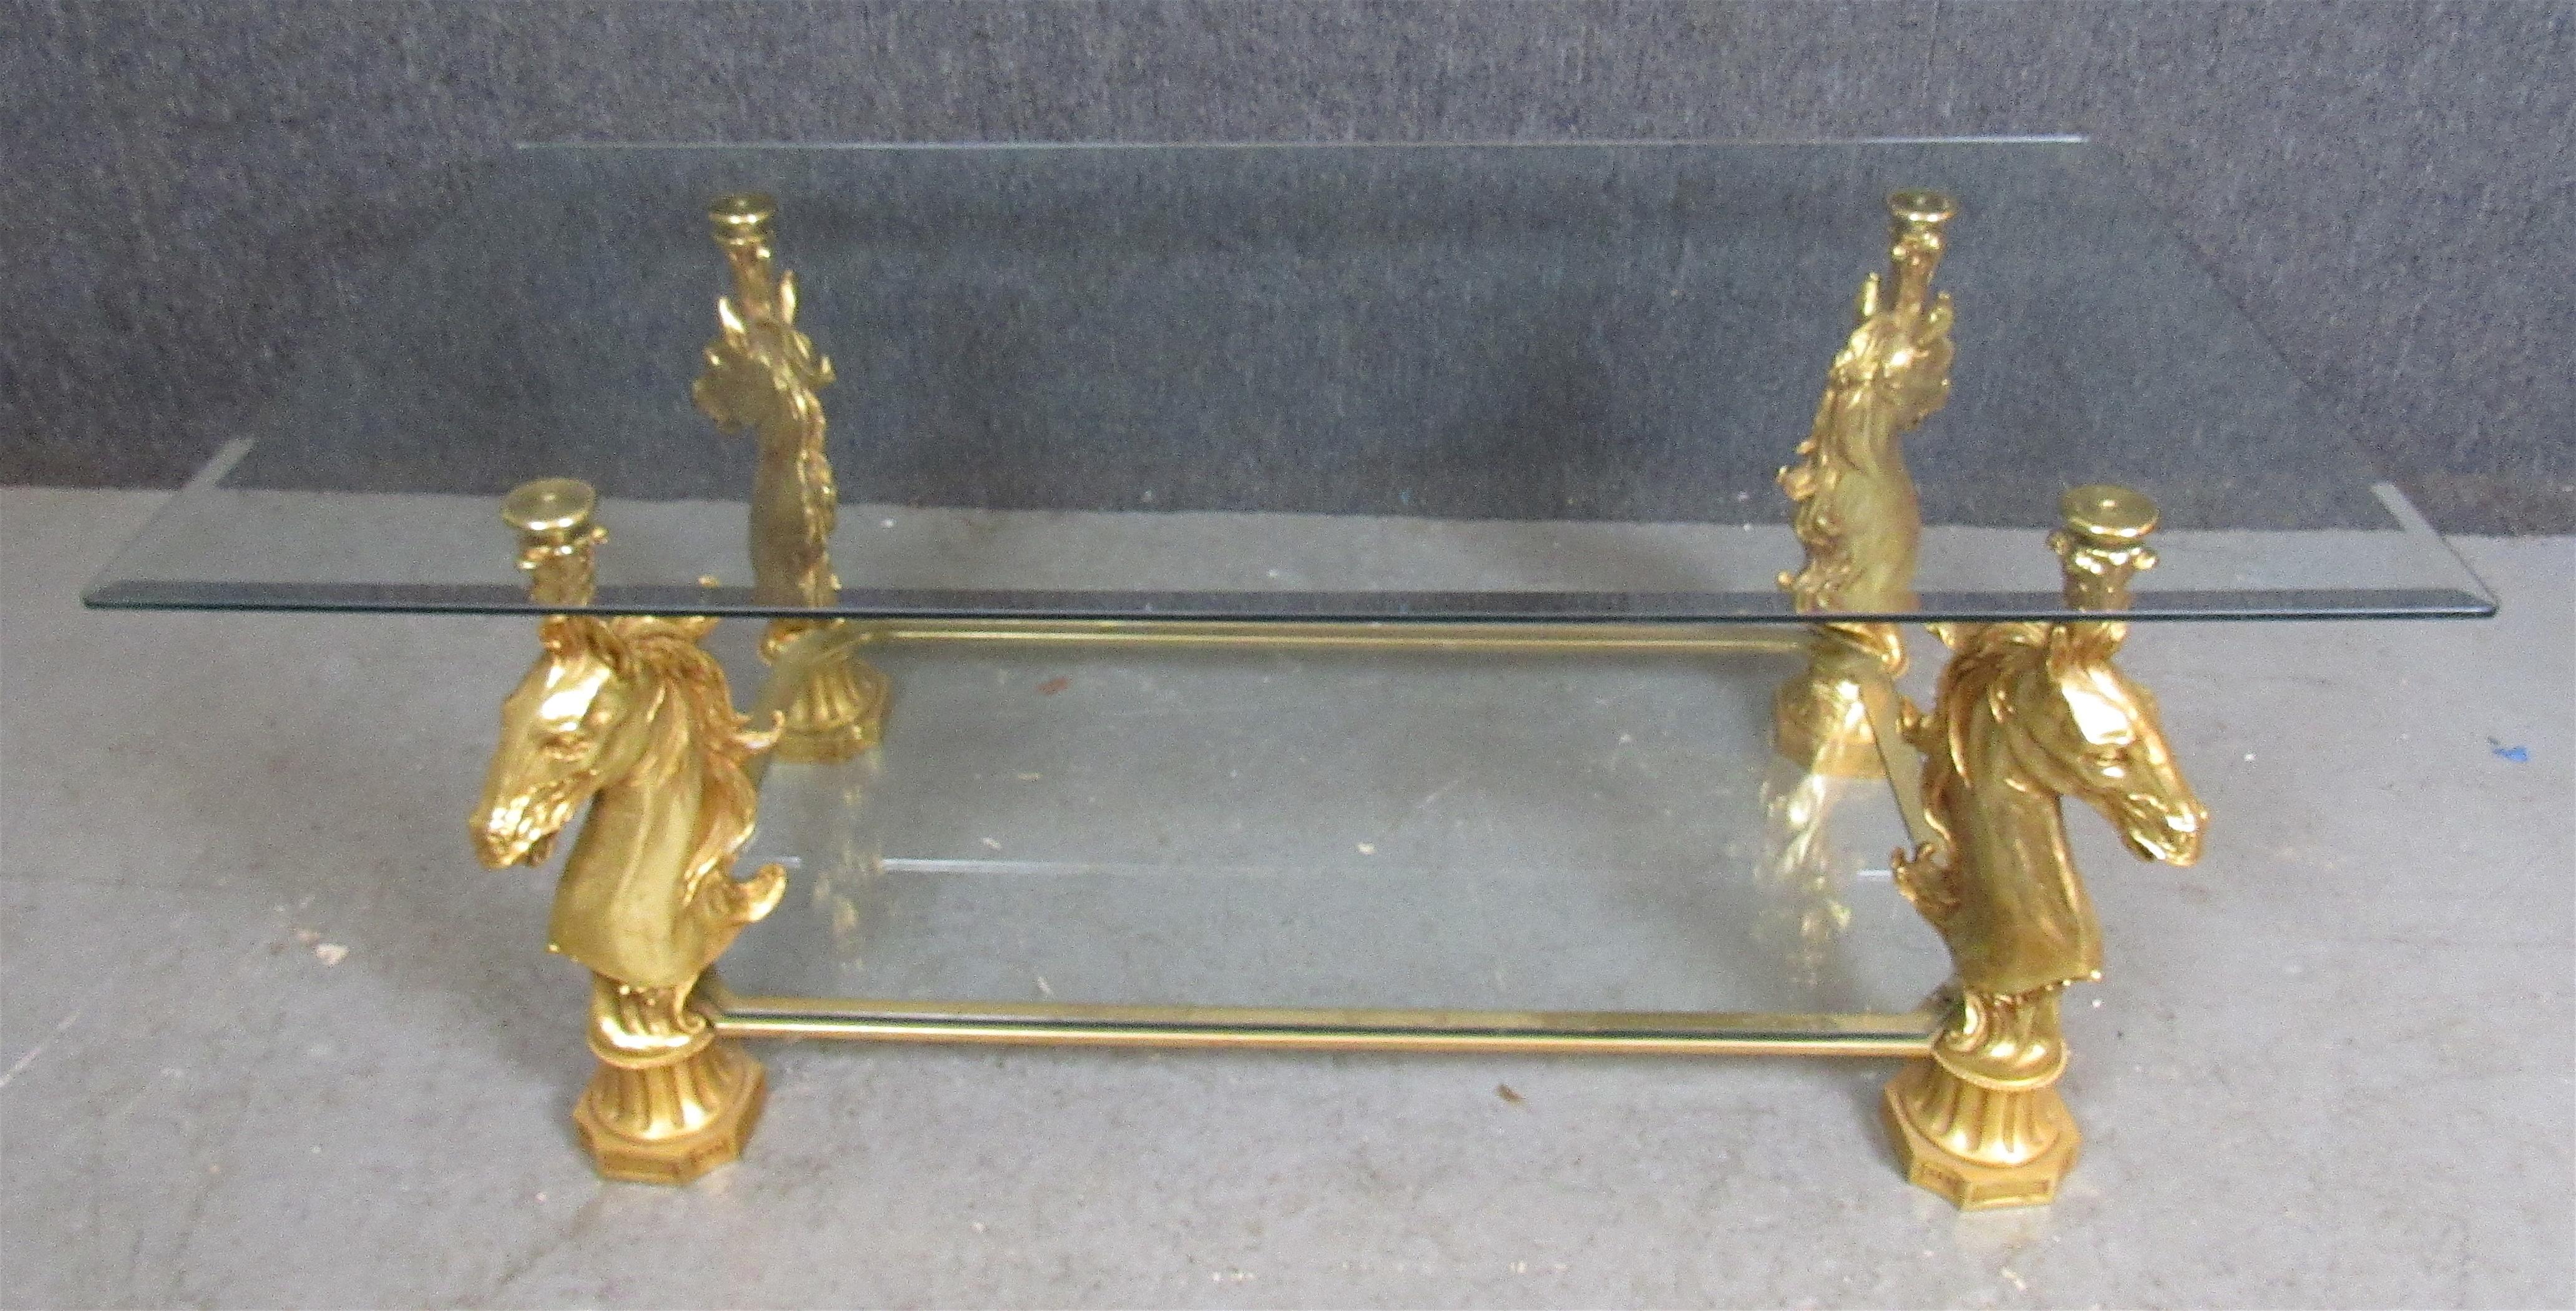 Unique two level glass table with finely detailed horse head supports. Signed 